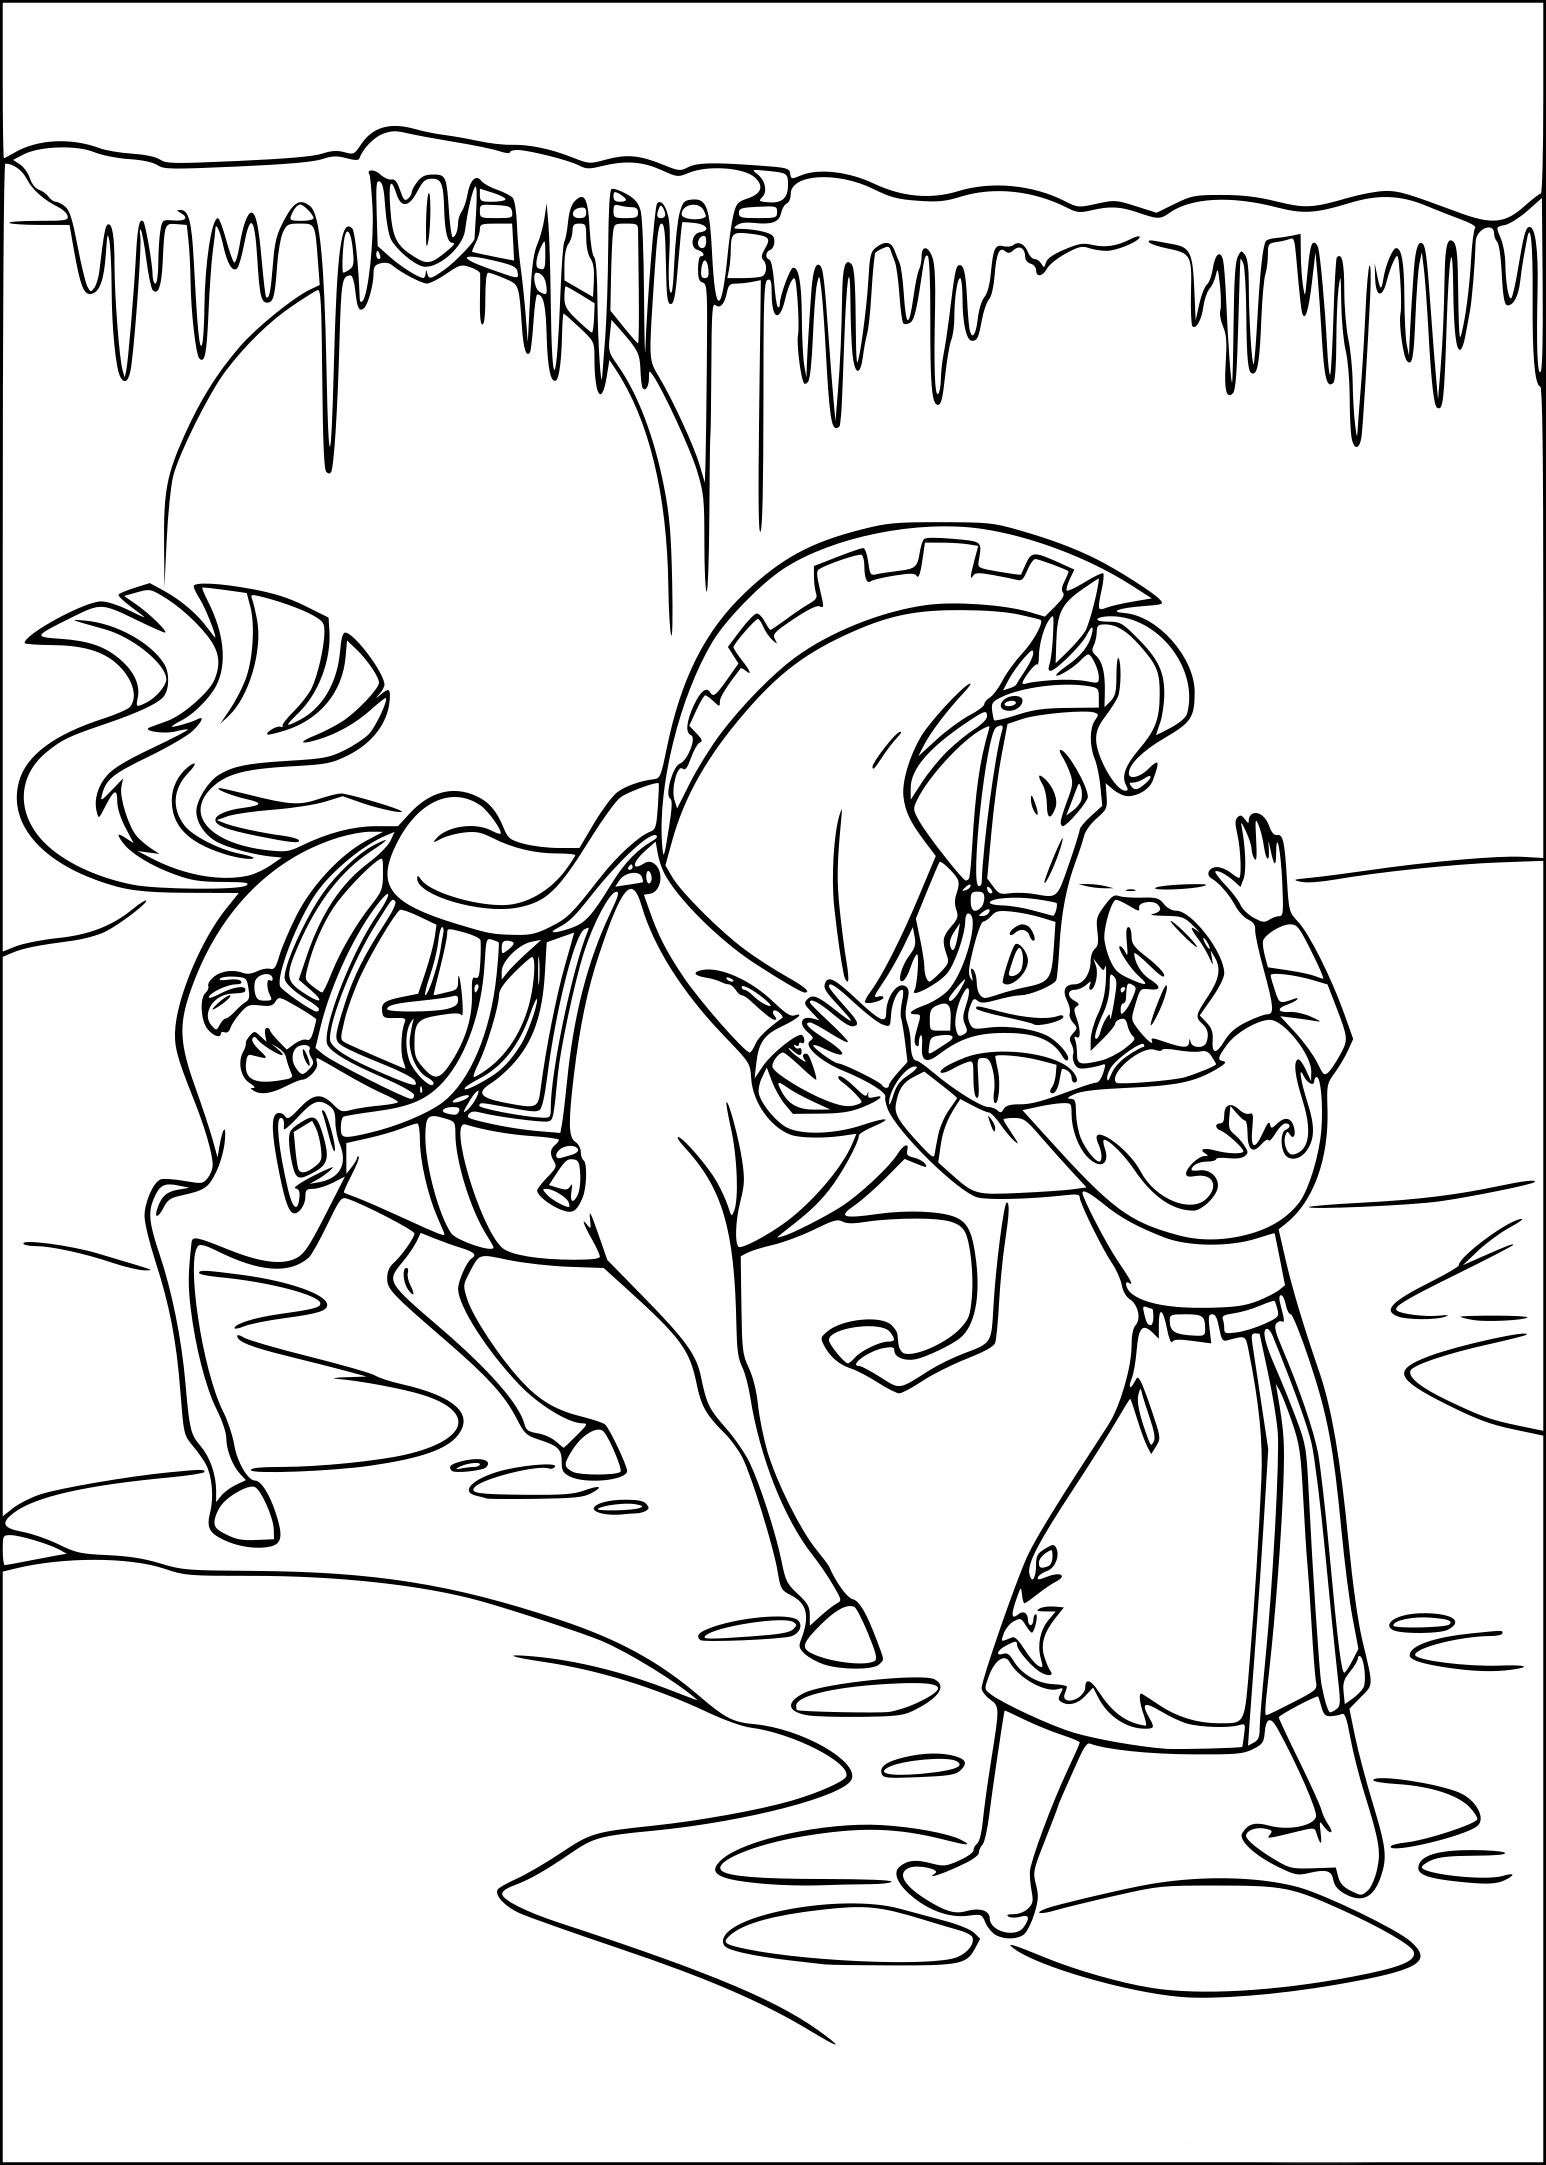 Hans And Sitron coloring page